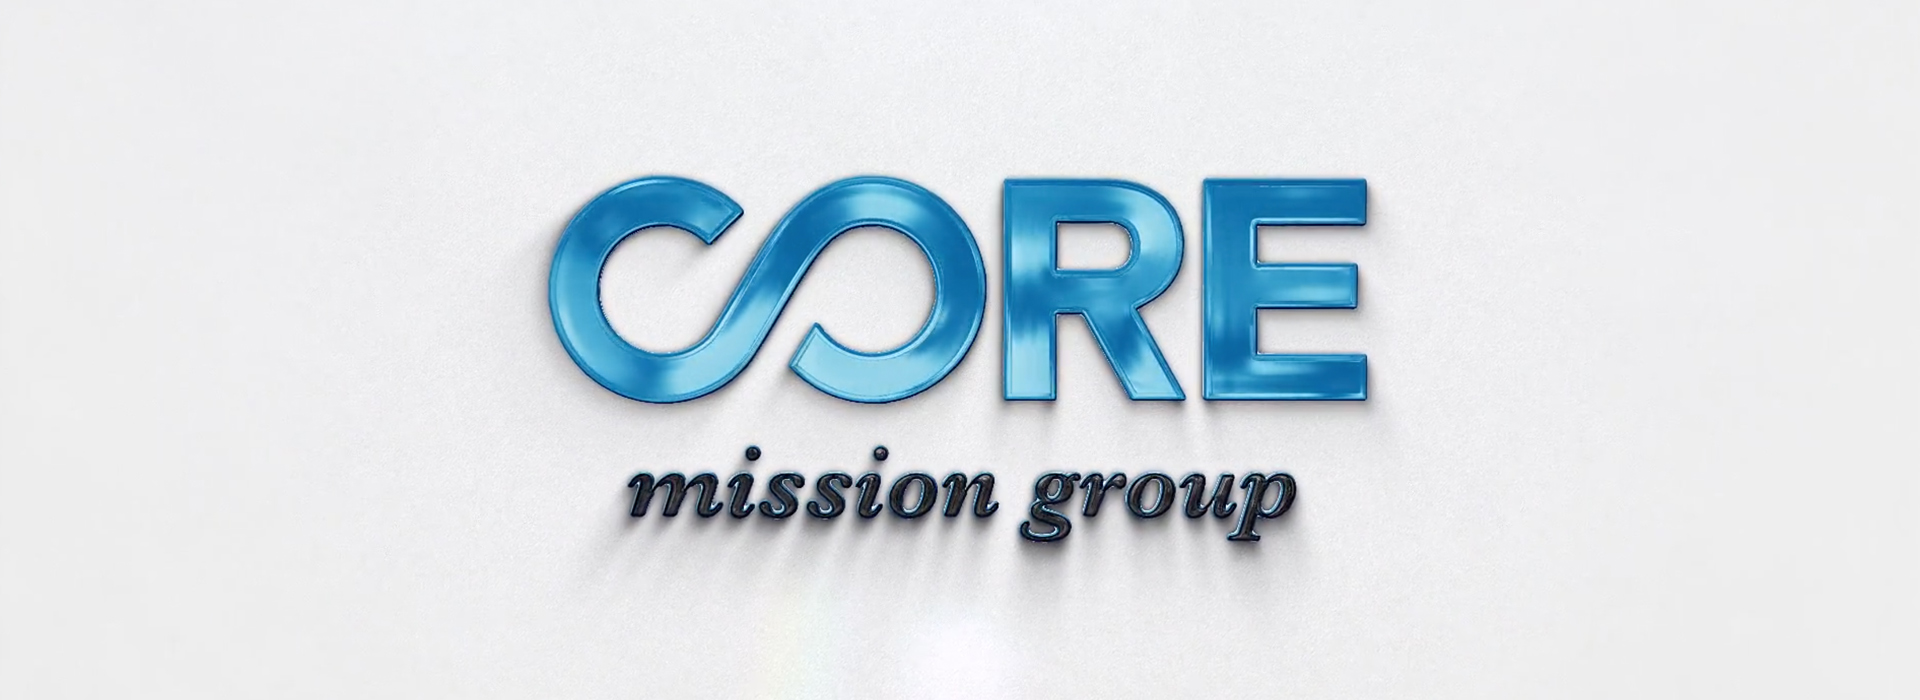 CORE MISSION GROUP